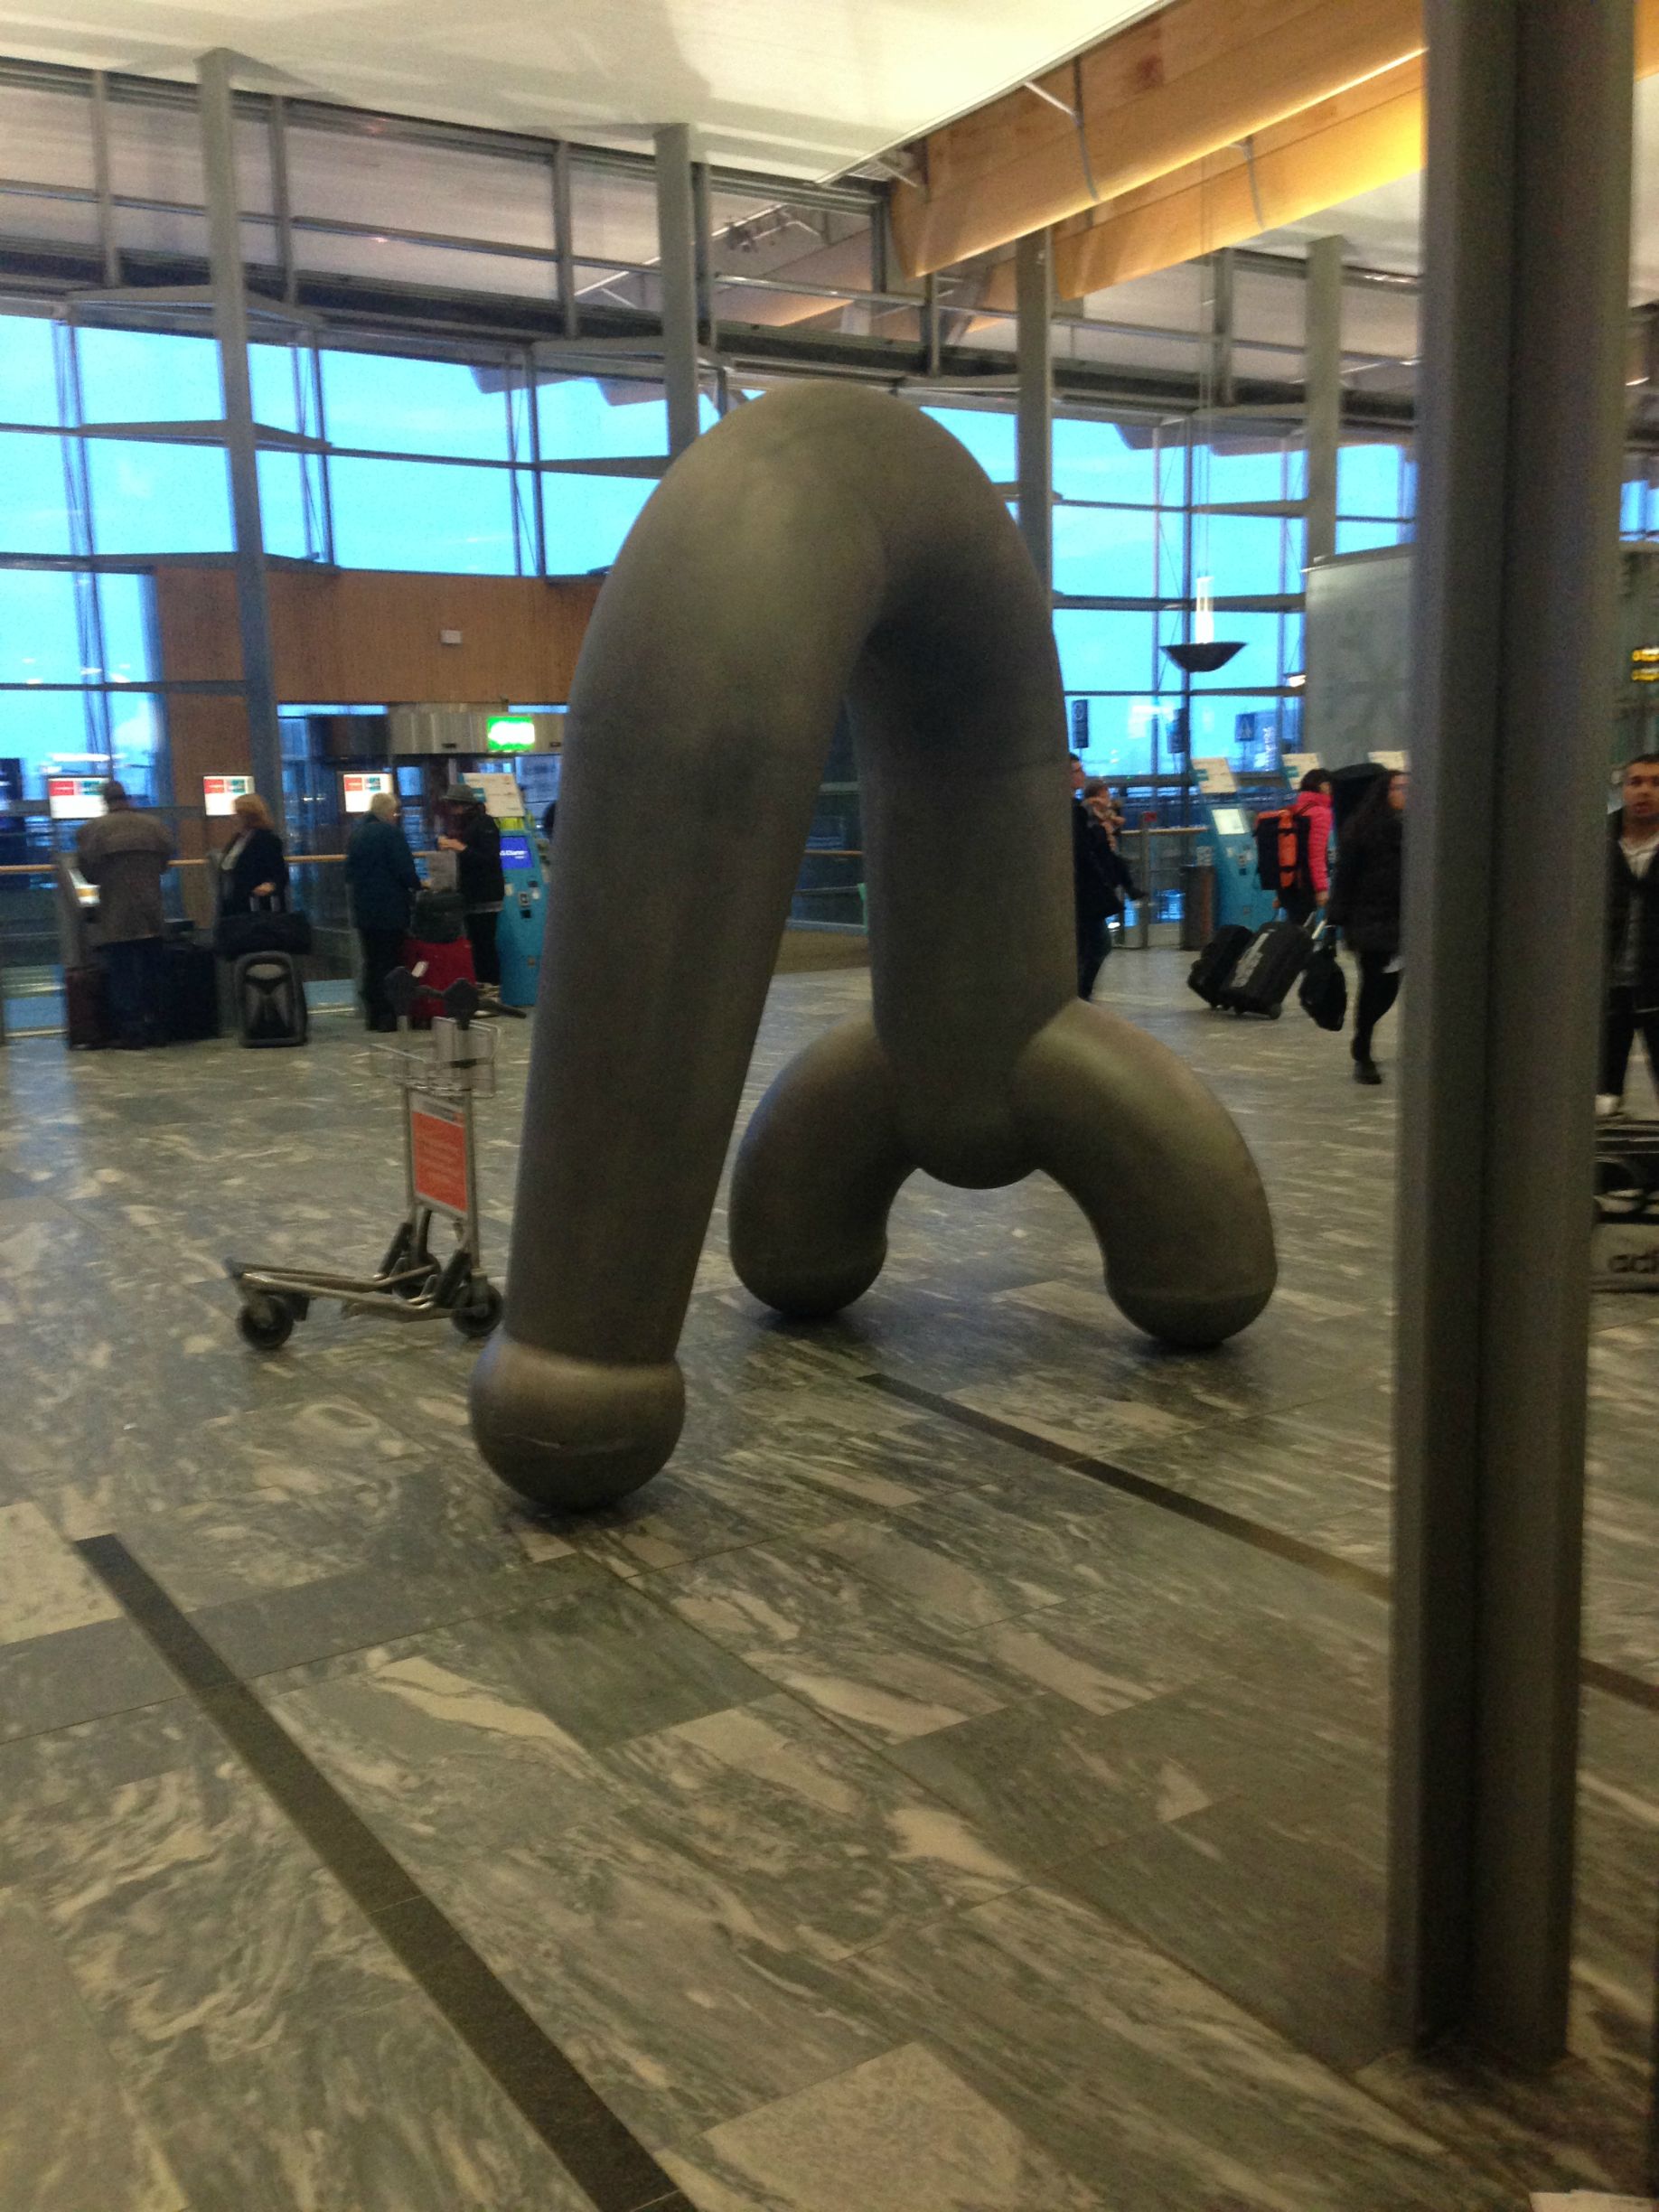 saw this in the Oslo airport, best part is there are more around.